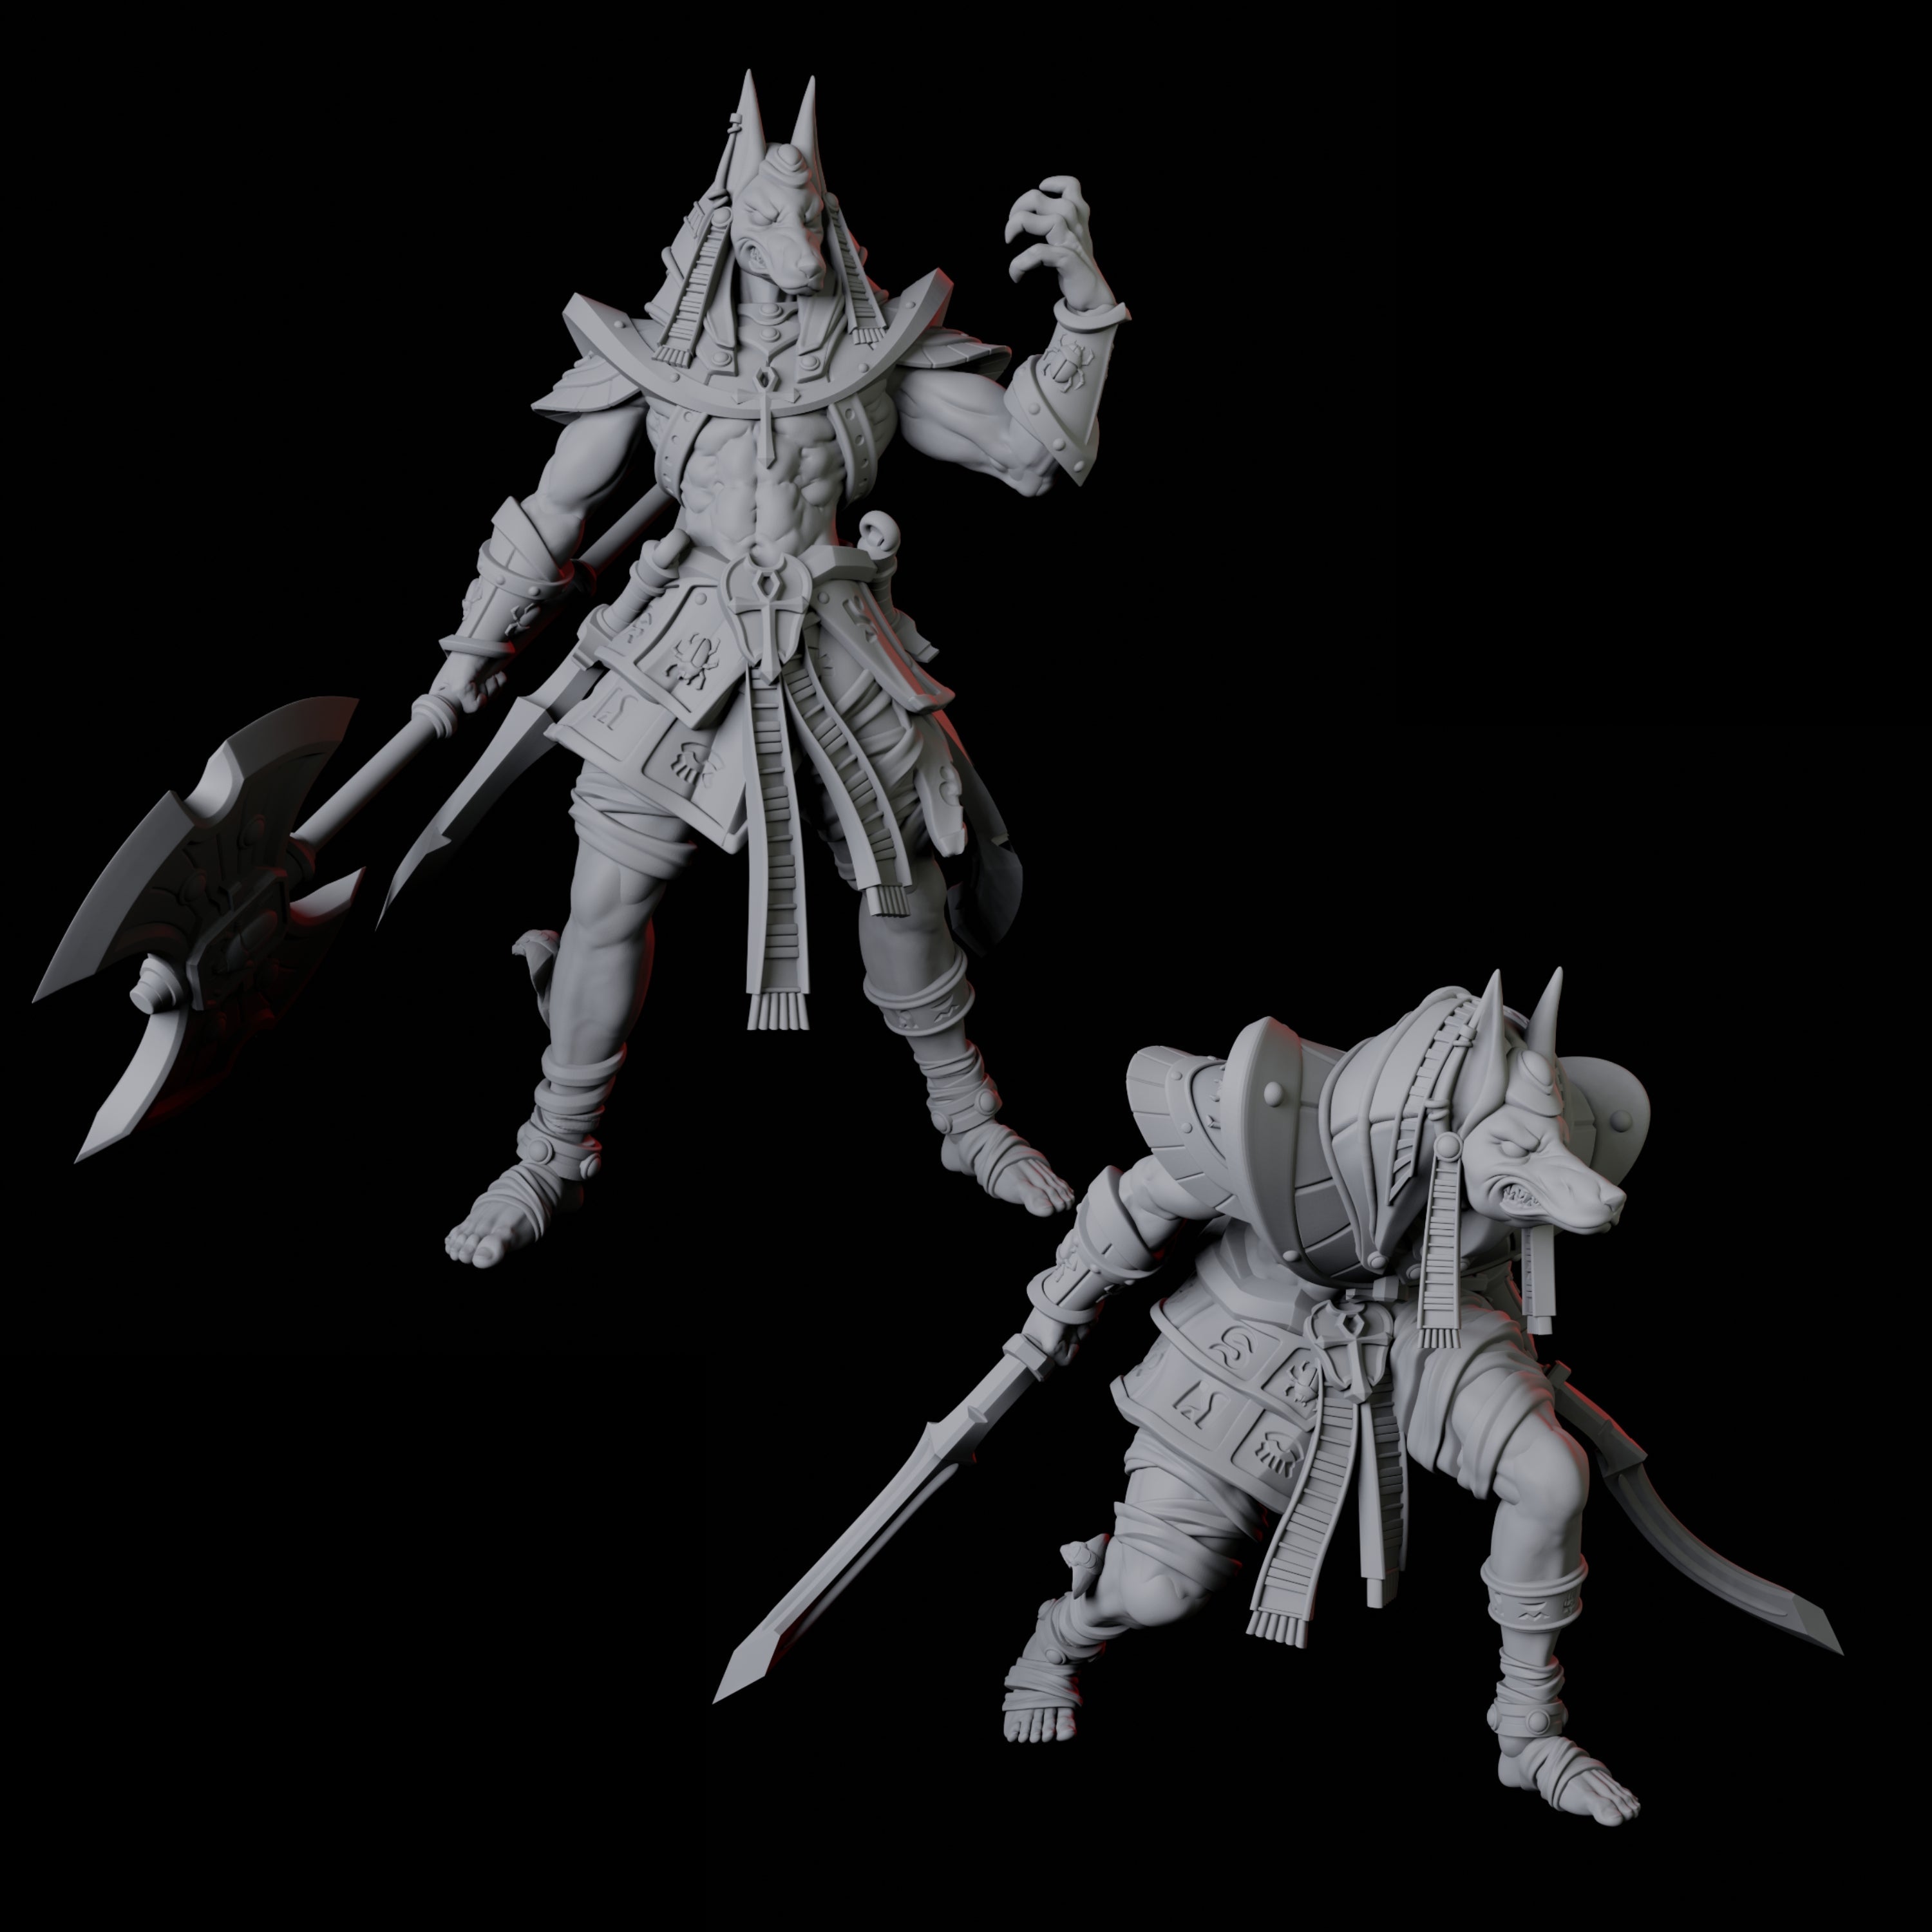 Pair of Anubis Jackal Egyptian Gods Miniature for Dungeons and Dragons, Pathfinder or other TTRPGs